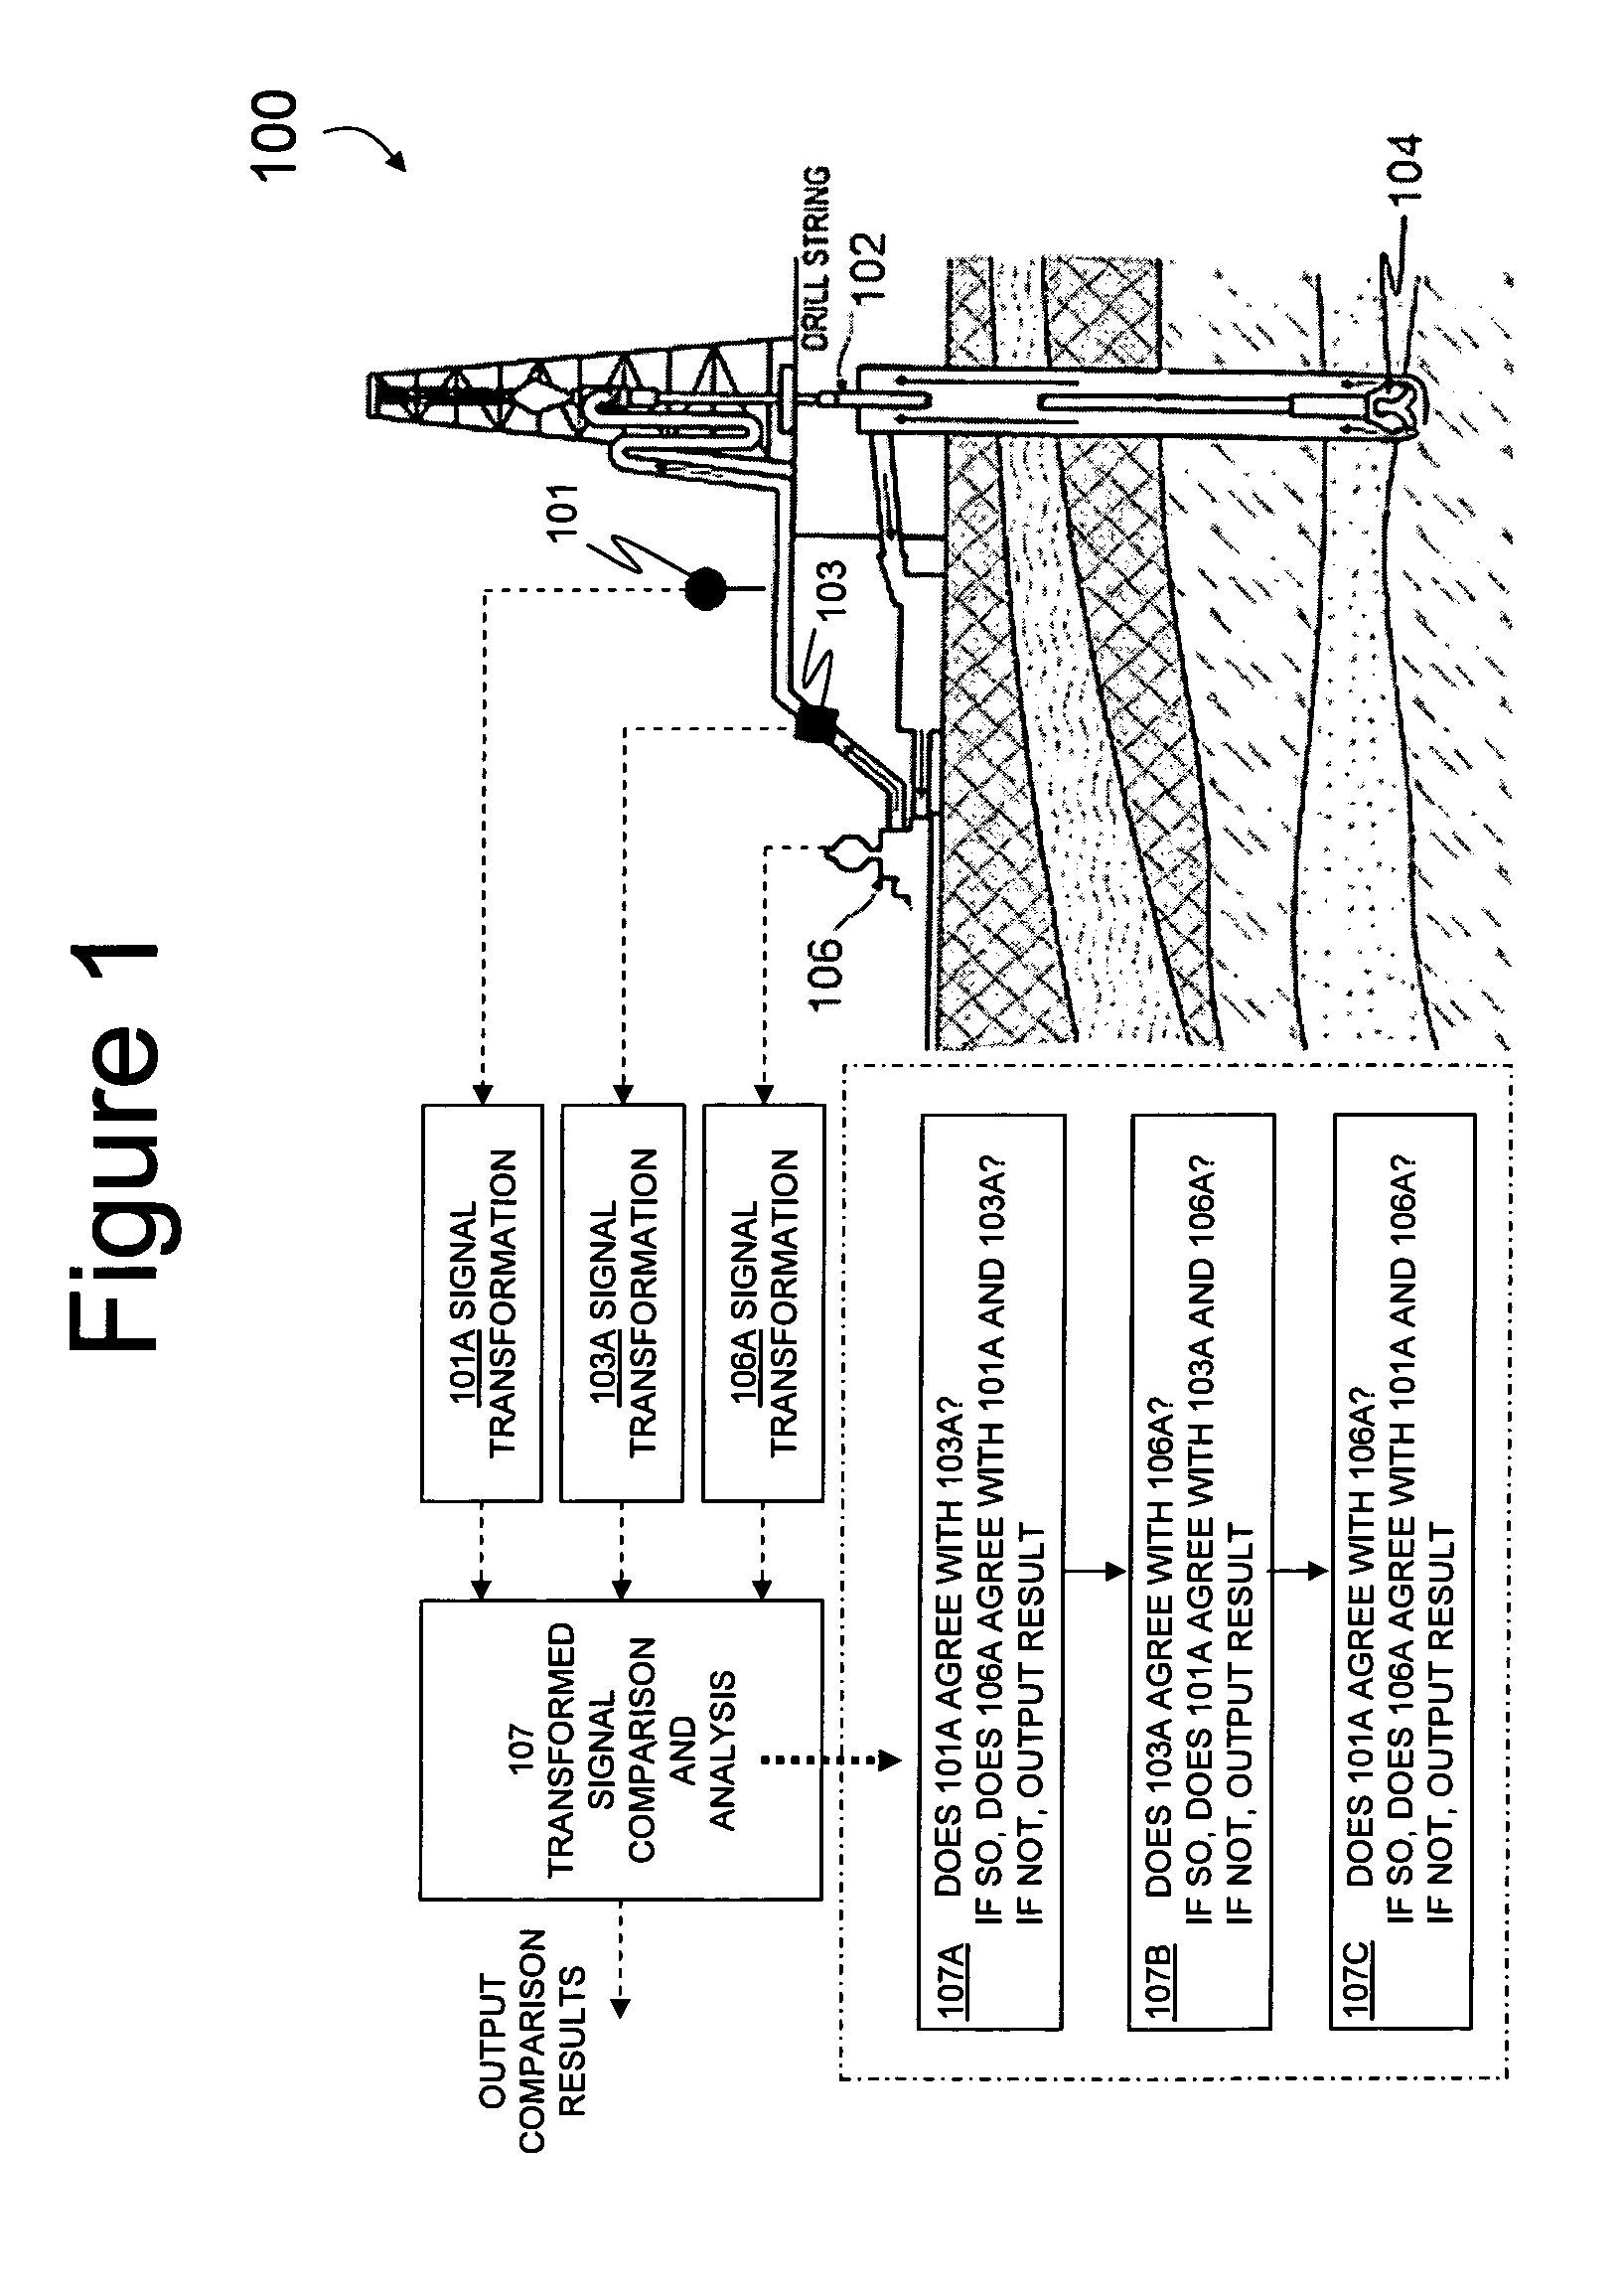 Methods to monitor system sensor and actuator health and performance